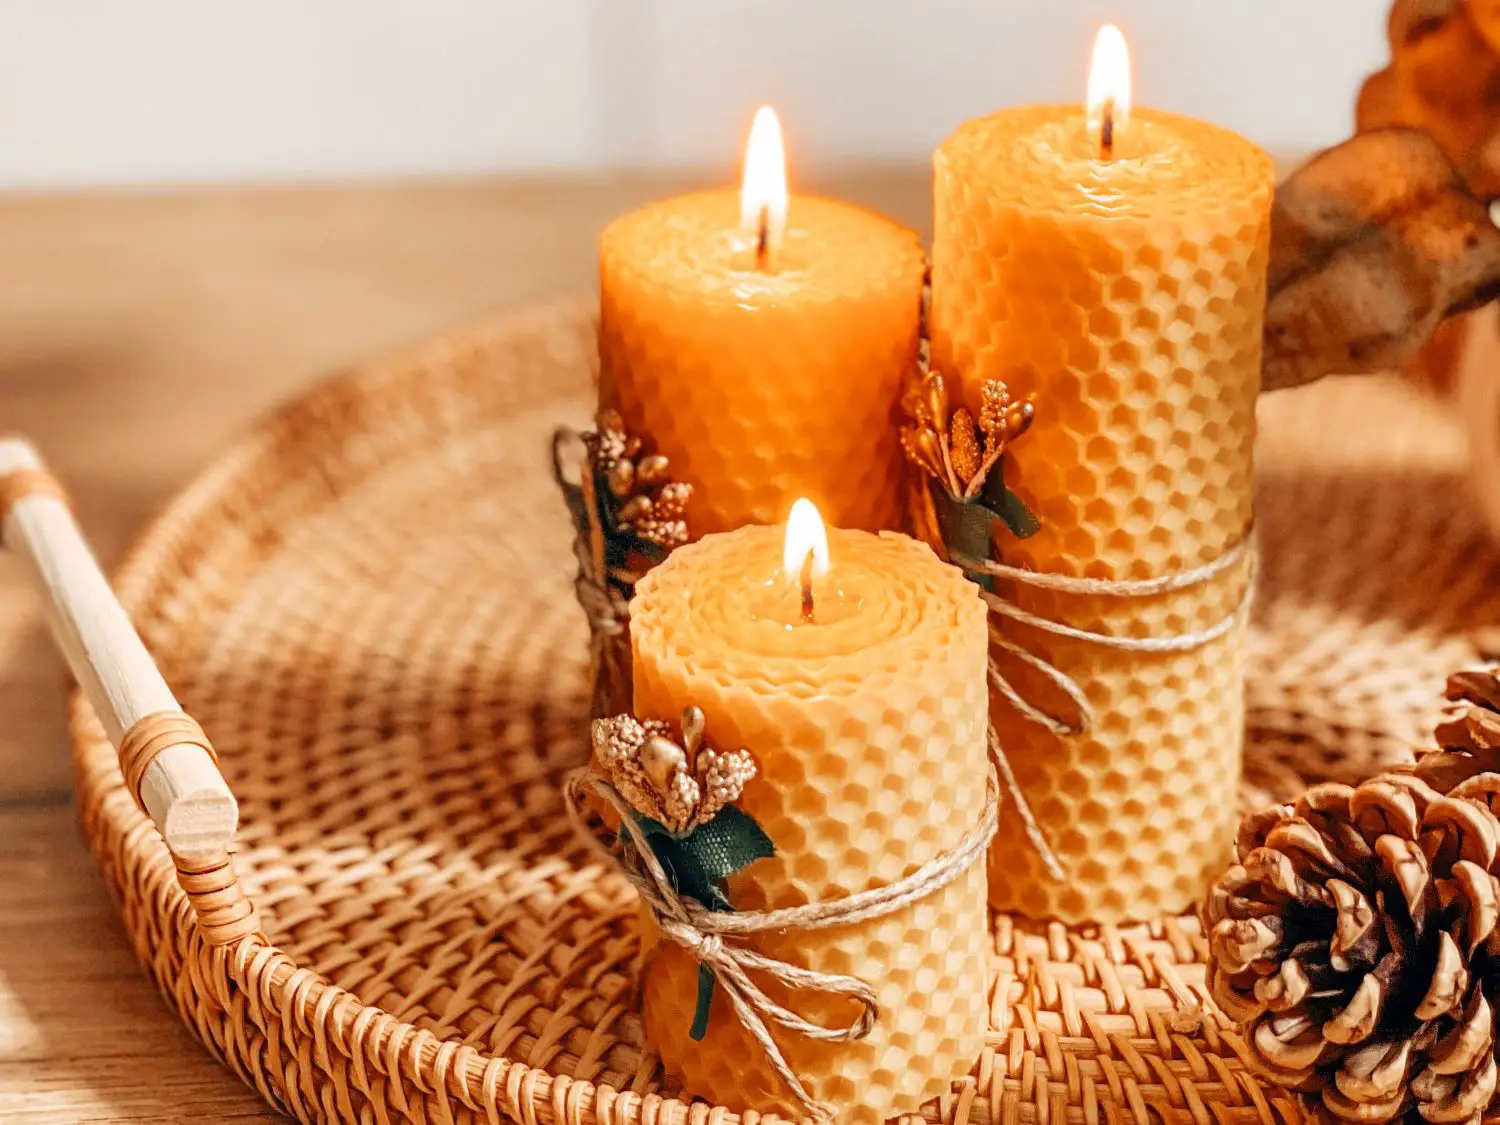 Pros and Cons of Beeswax Candles, we review the facts